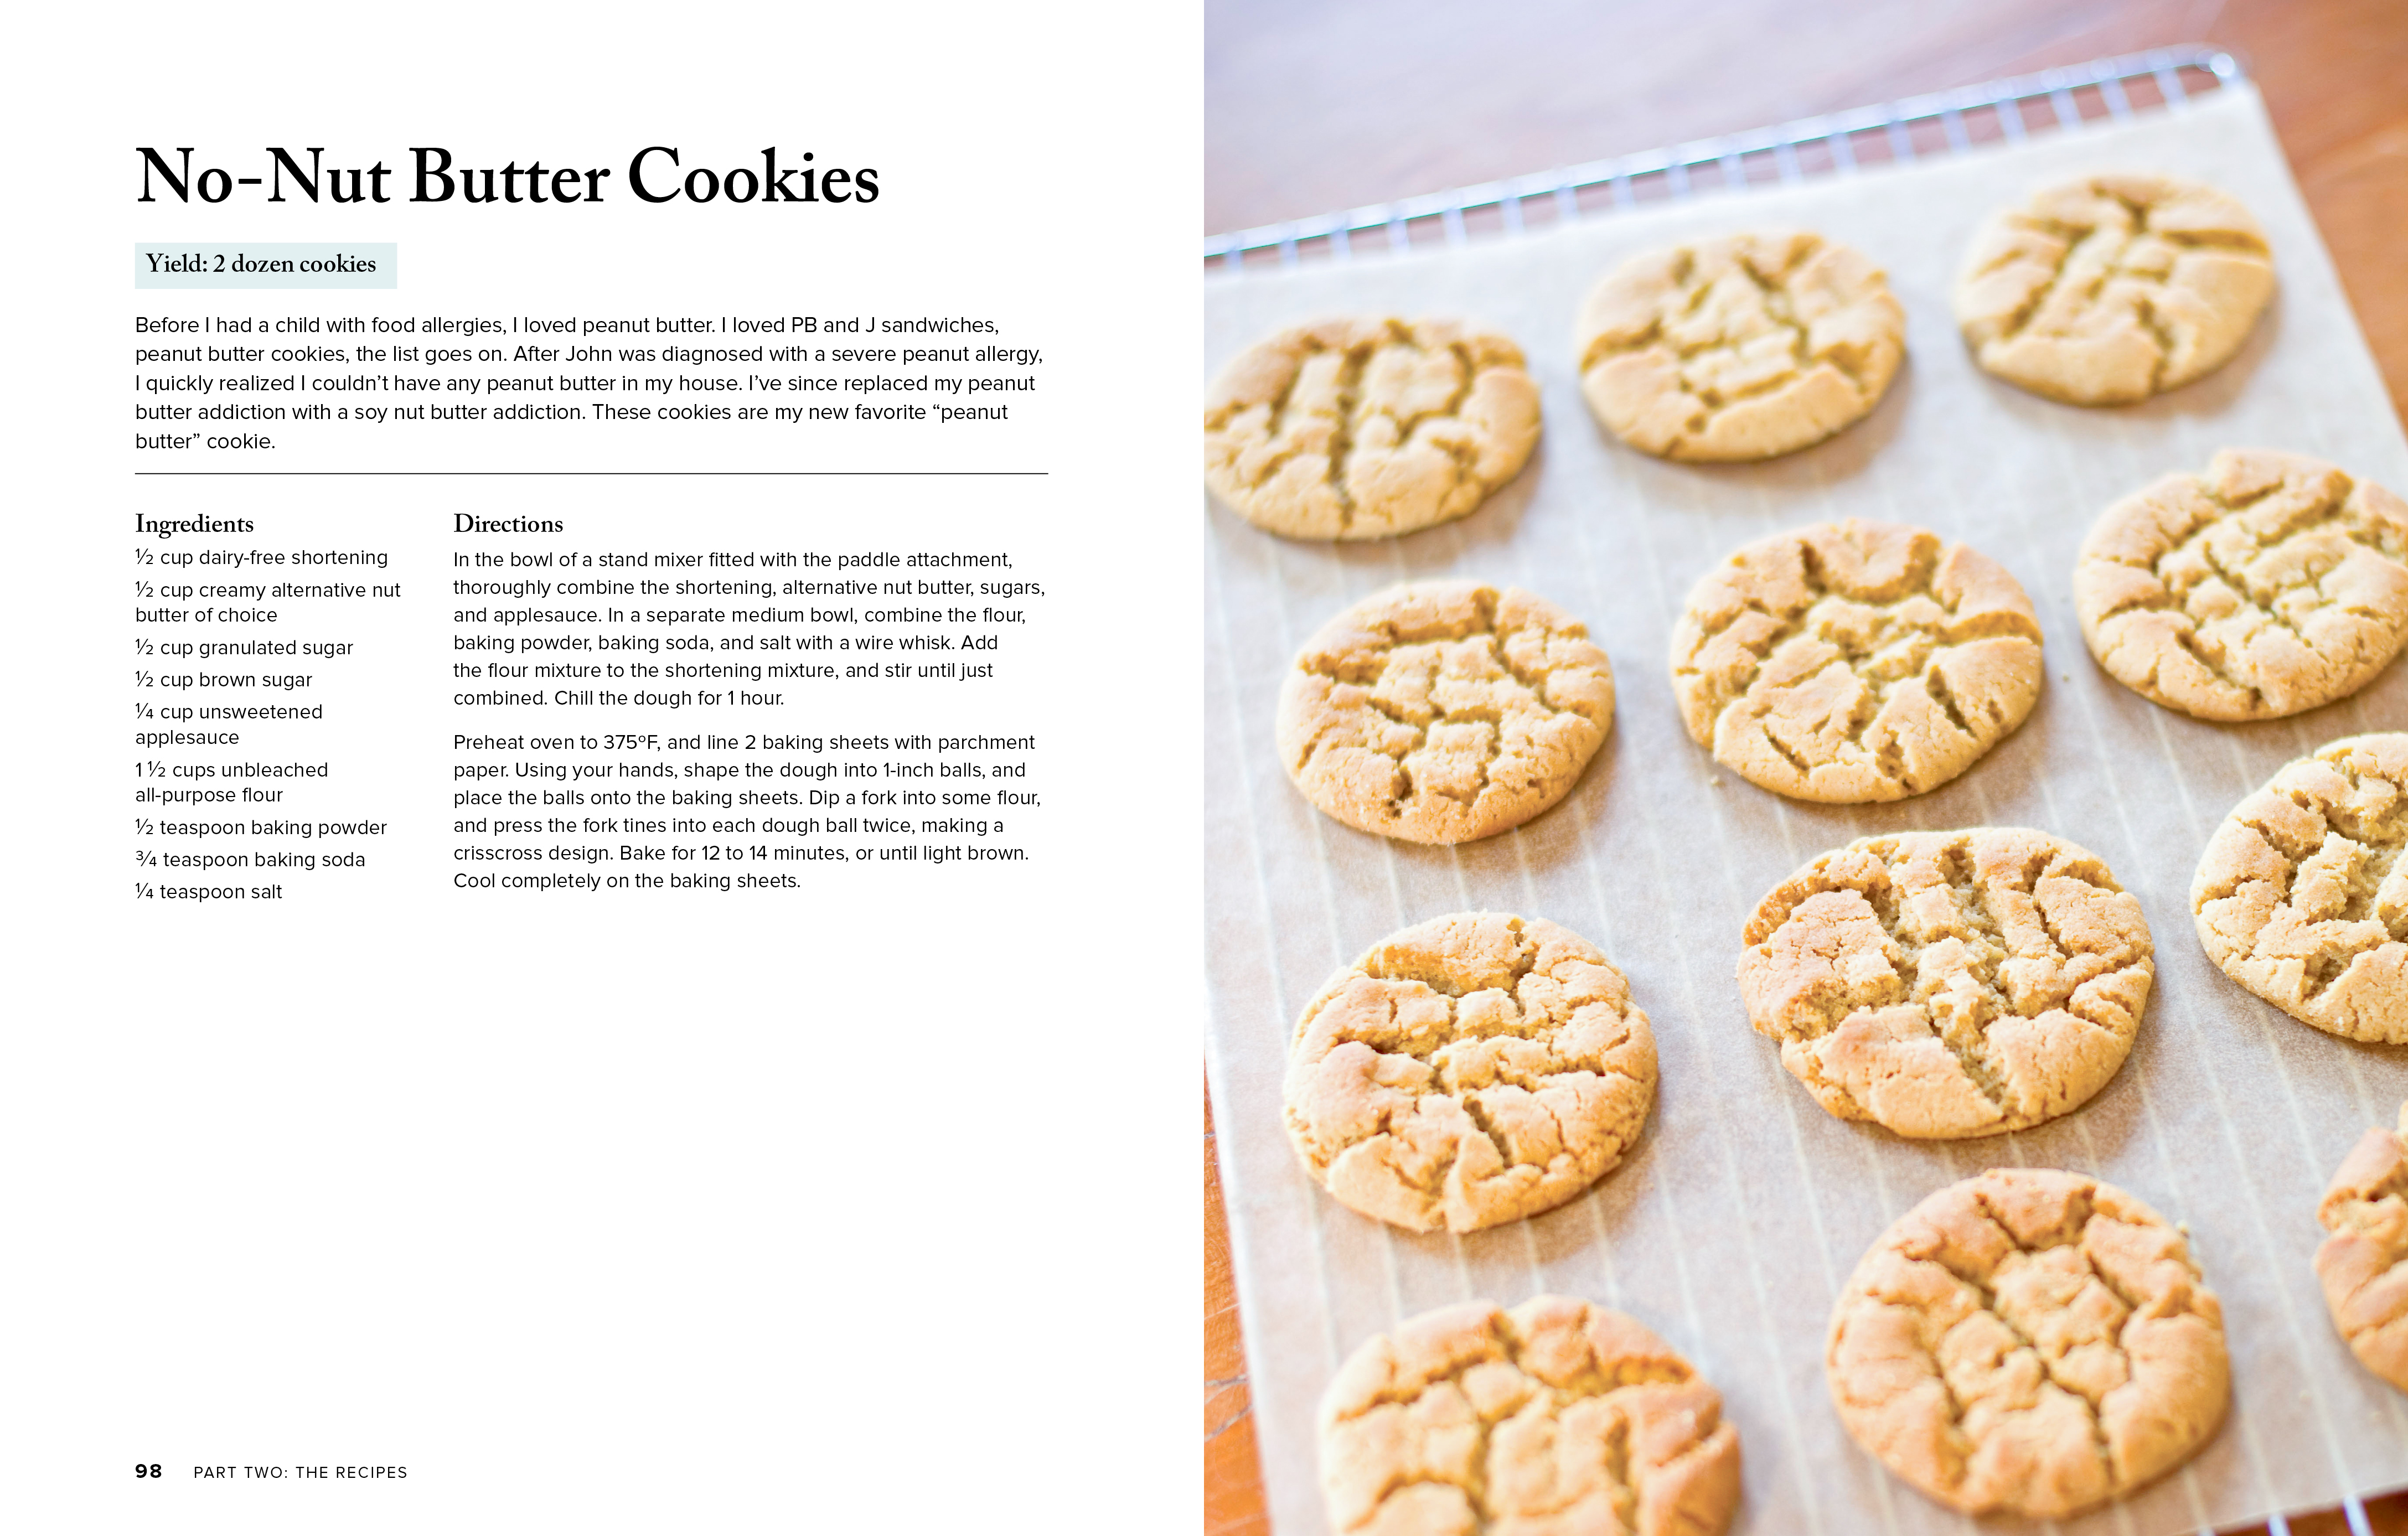 The Food Allergy Baking Book